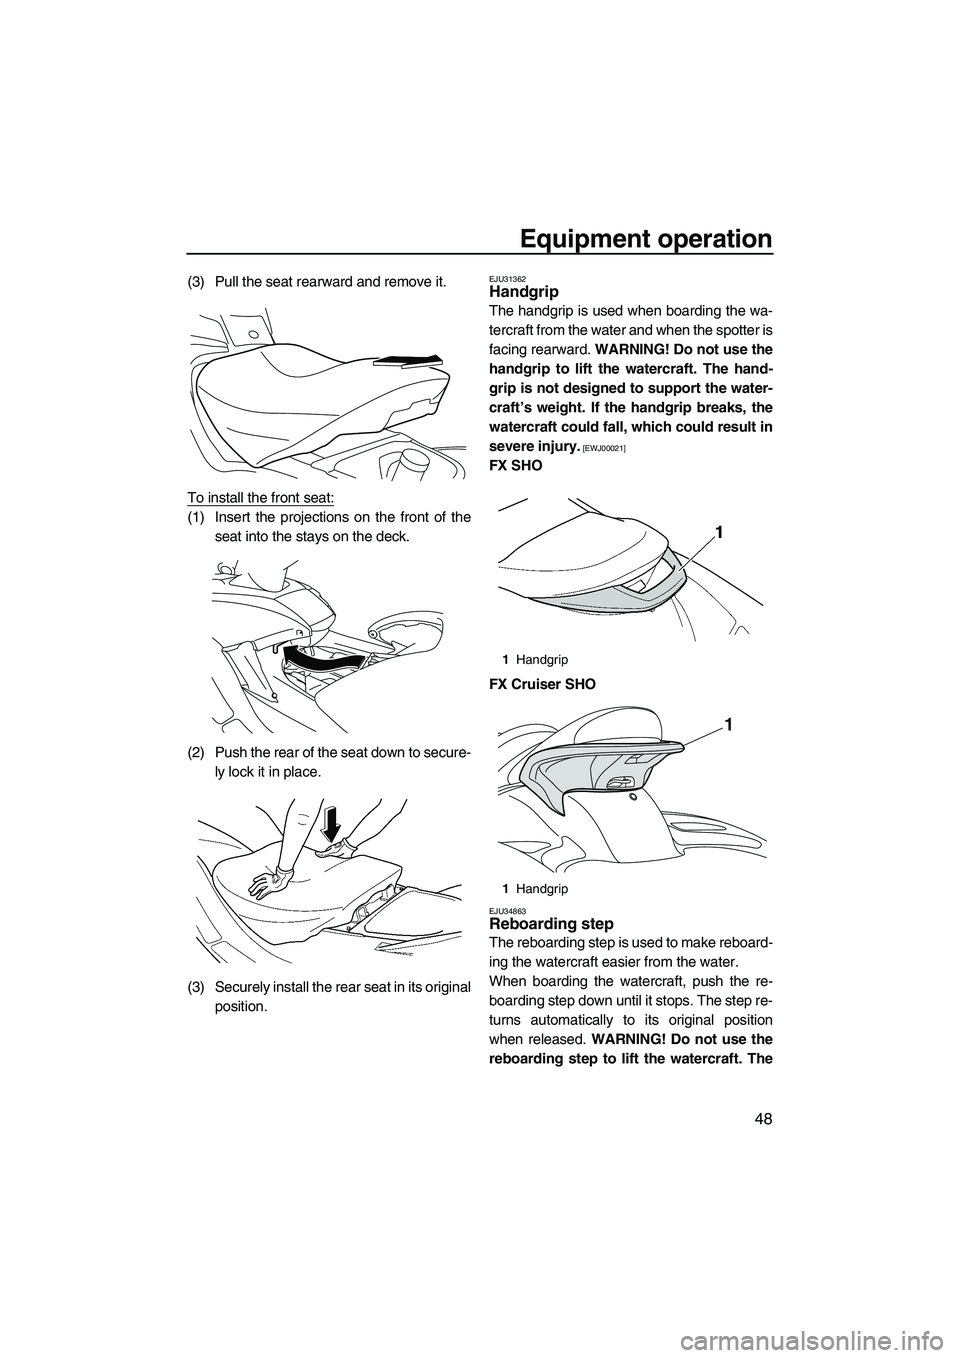 YAMAHA FX SHO 2010  Owners Manual Equipment operation
48
(3) Pull the seat rearward and remove it.
To install the front seat:
(1) Insert the projections on the front of the
seat into the stays on the deck.
(2) Push the rear of the sea